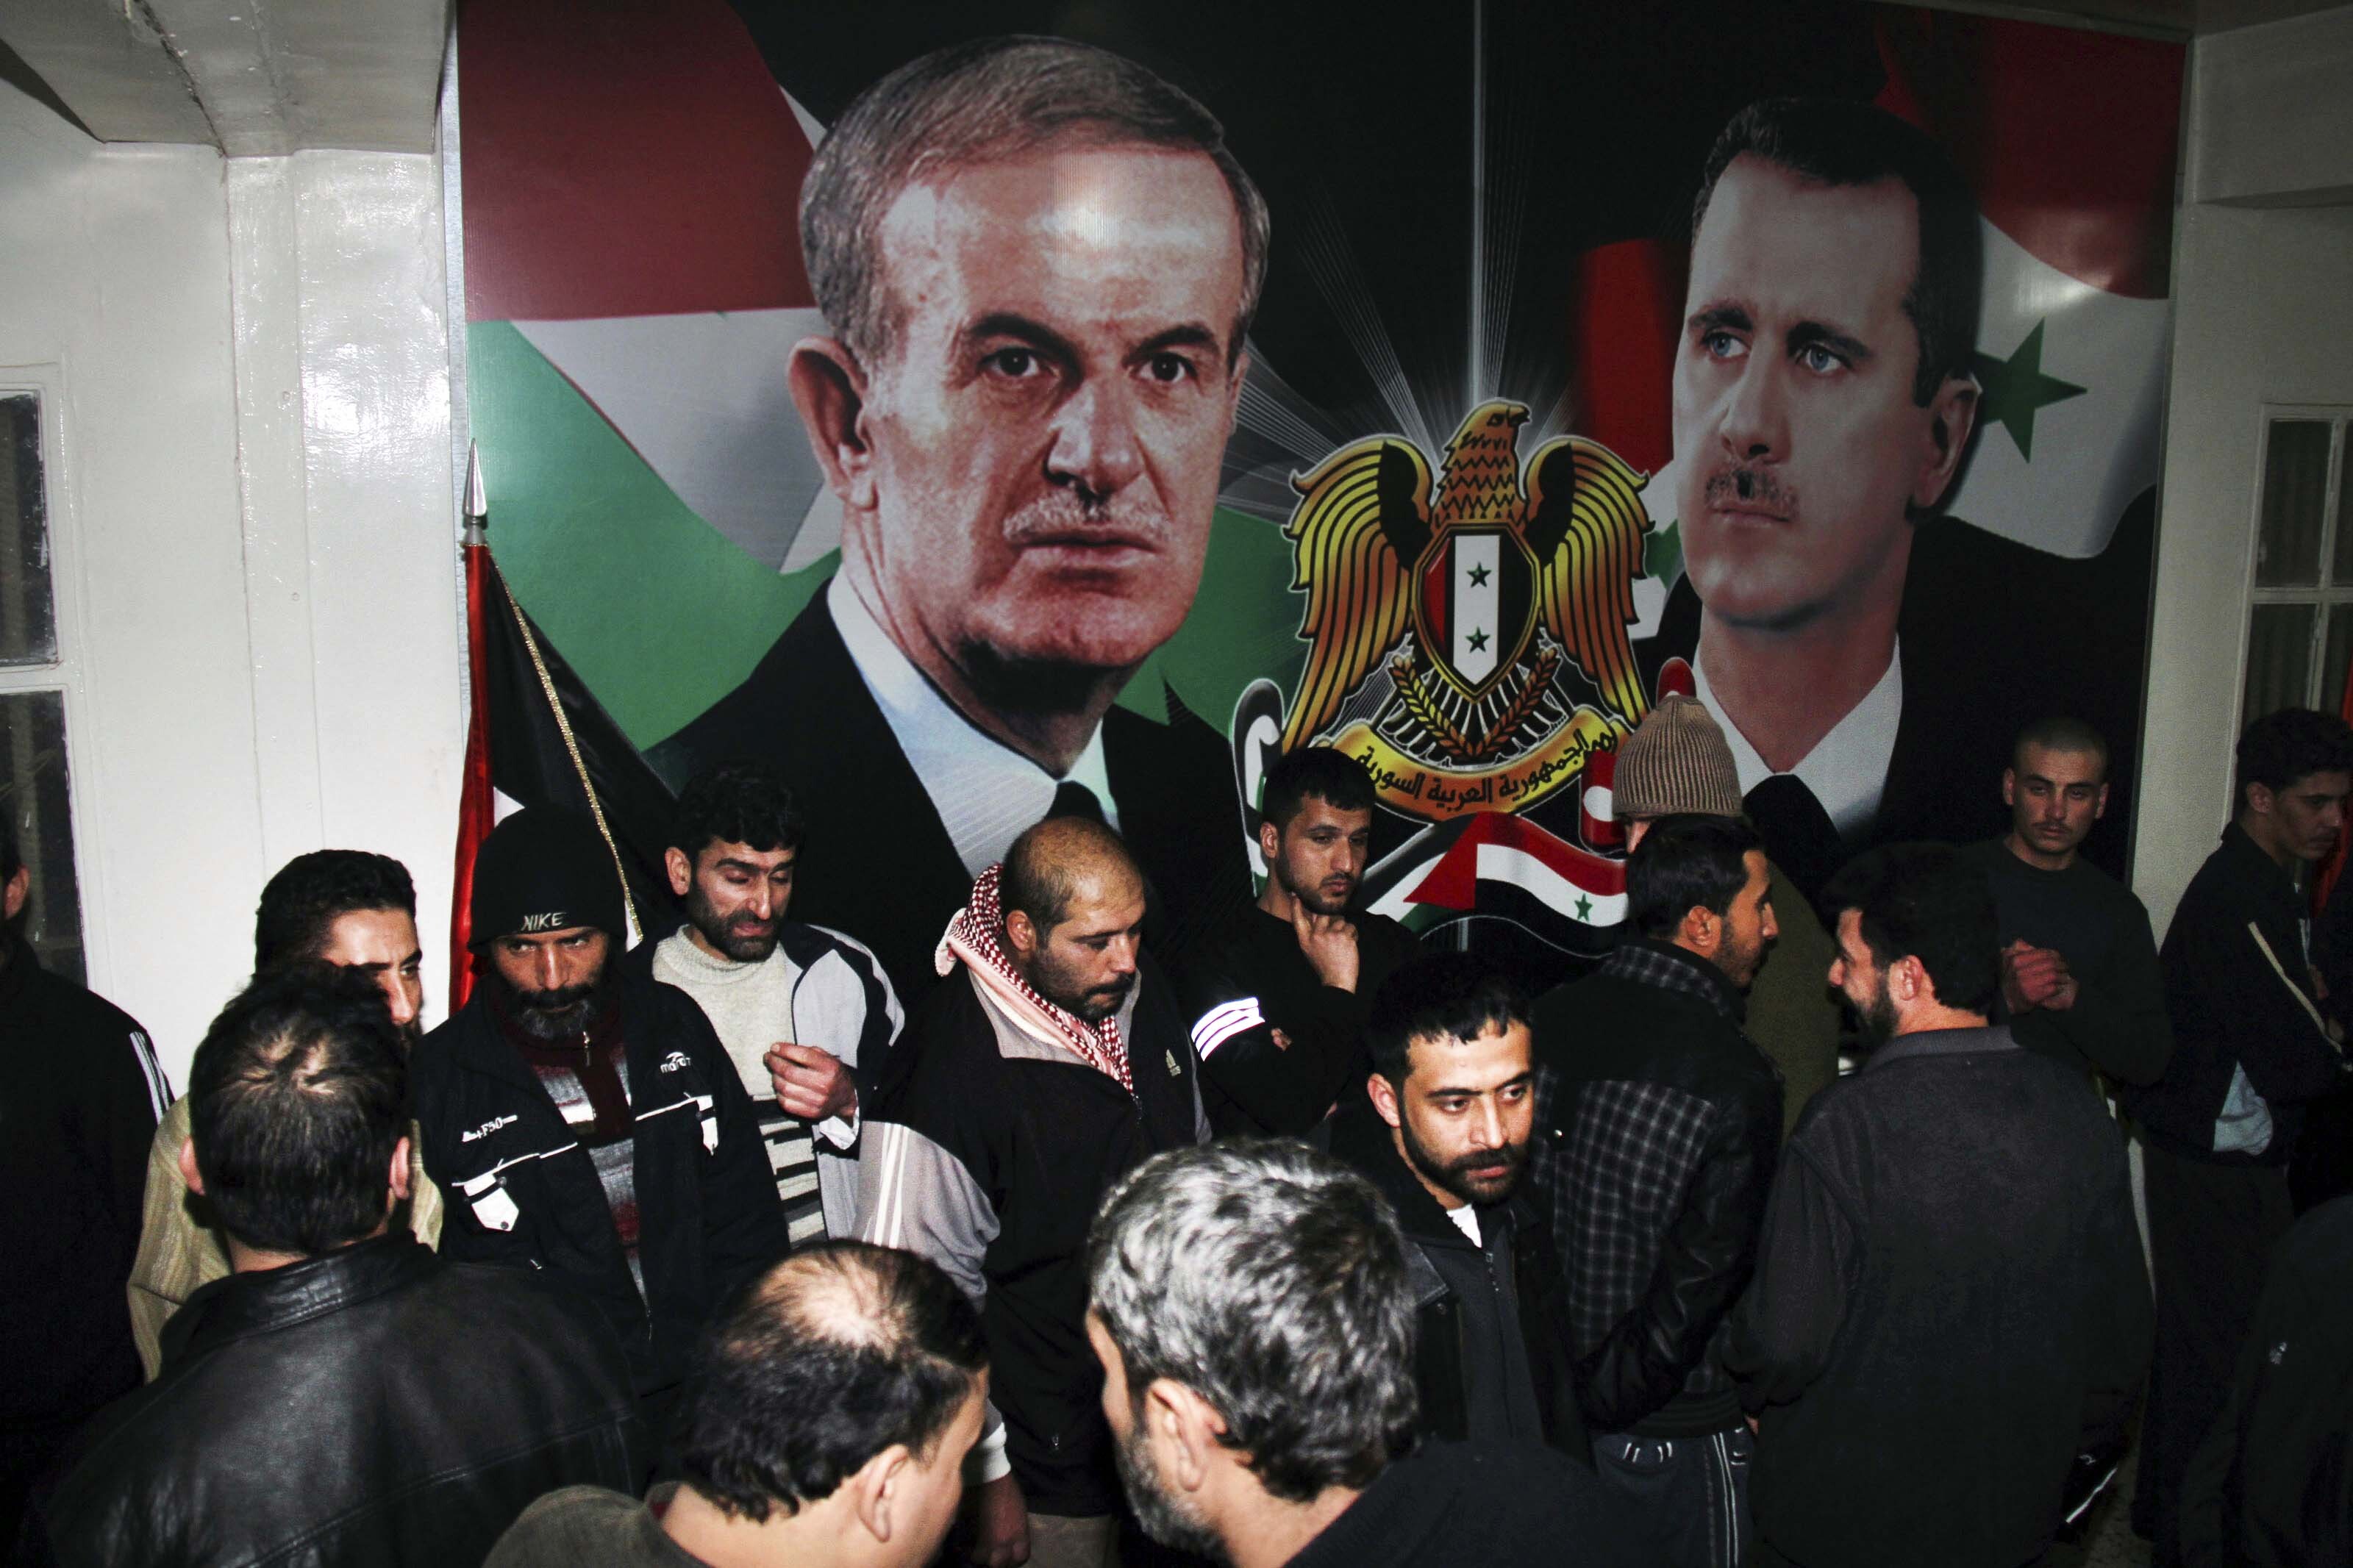 FILE - Freed Syrian detainees gather in front of posters showing Syrian President Bashar Assad, right, and his father Hafez Assad after they were released from Adra Prison on the north-east outskirts of Damascus, Syria, on Jan. 15, 2013. A former Syrian military official who oversaw the prison where human rights officials say torture and abuse took place has been arrested in Los Angeles on suspicion of immigration fraud. (AP Photo/Bassem Tellawi, File)